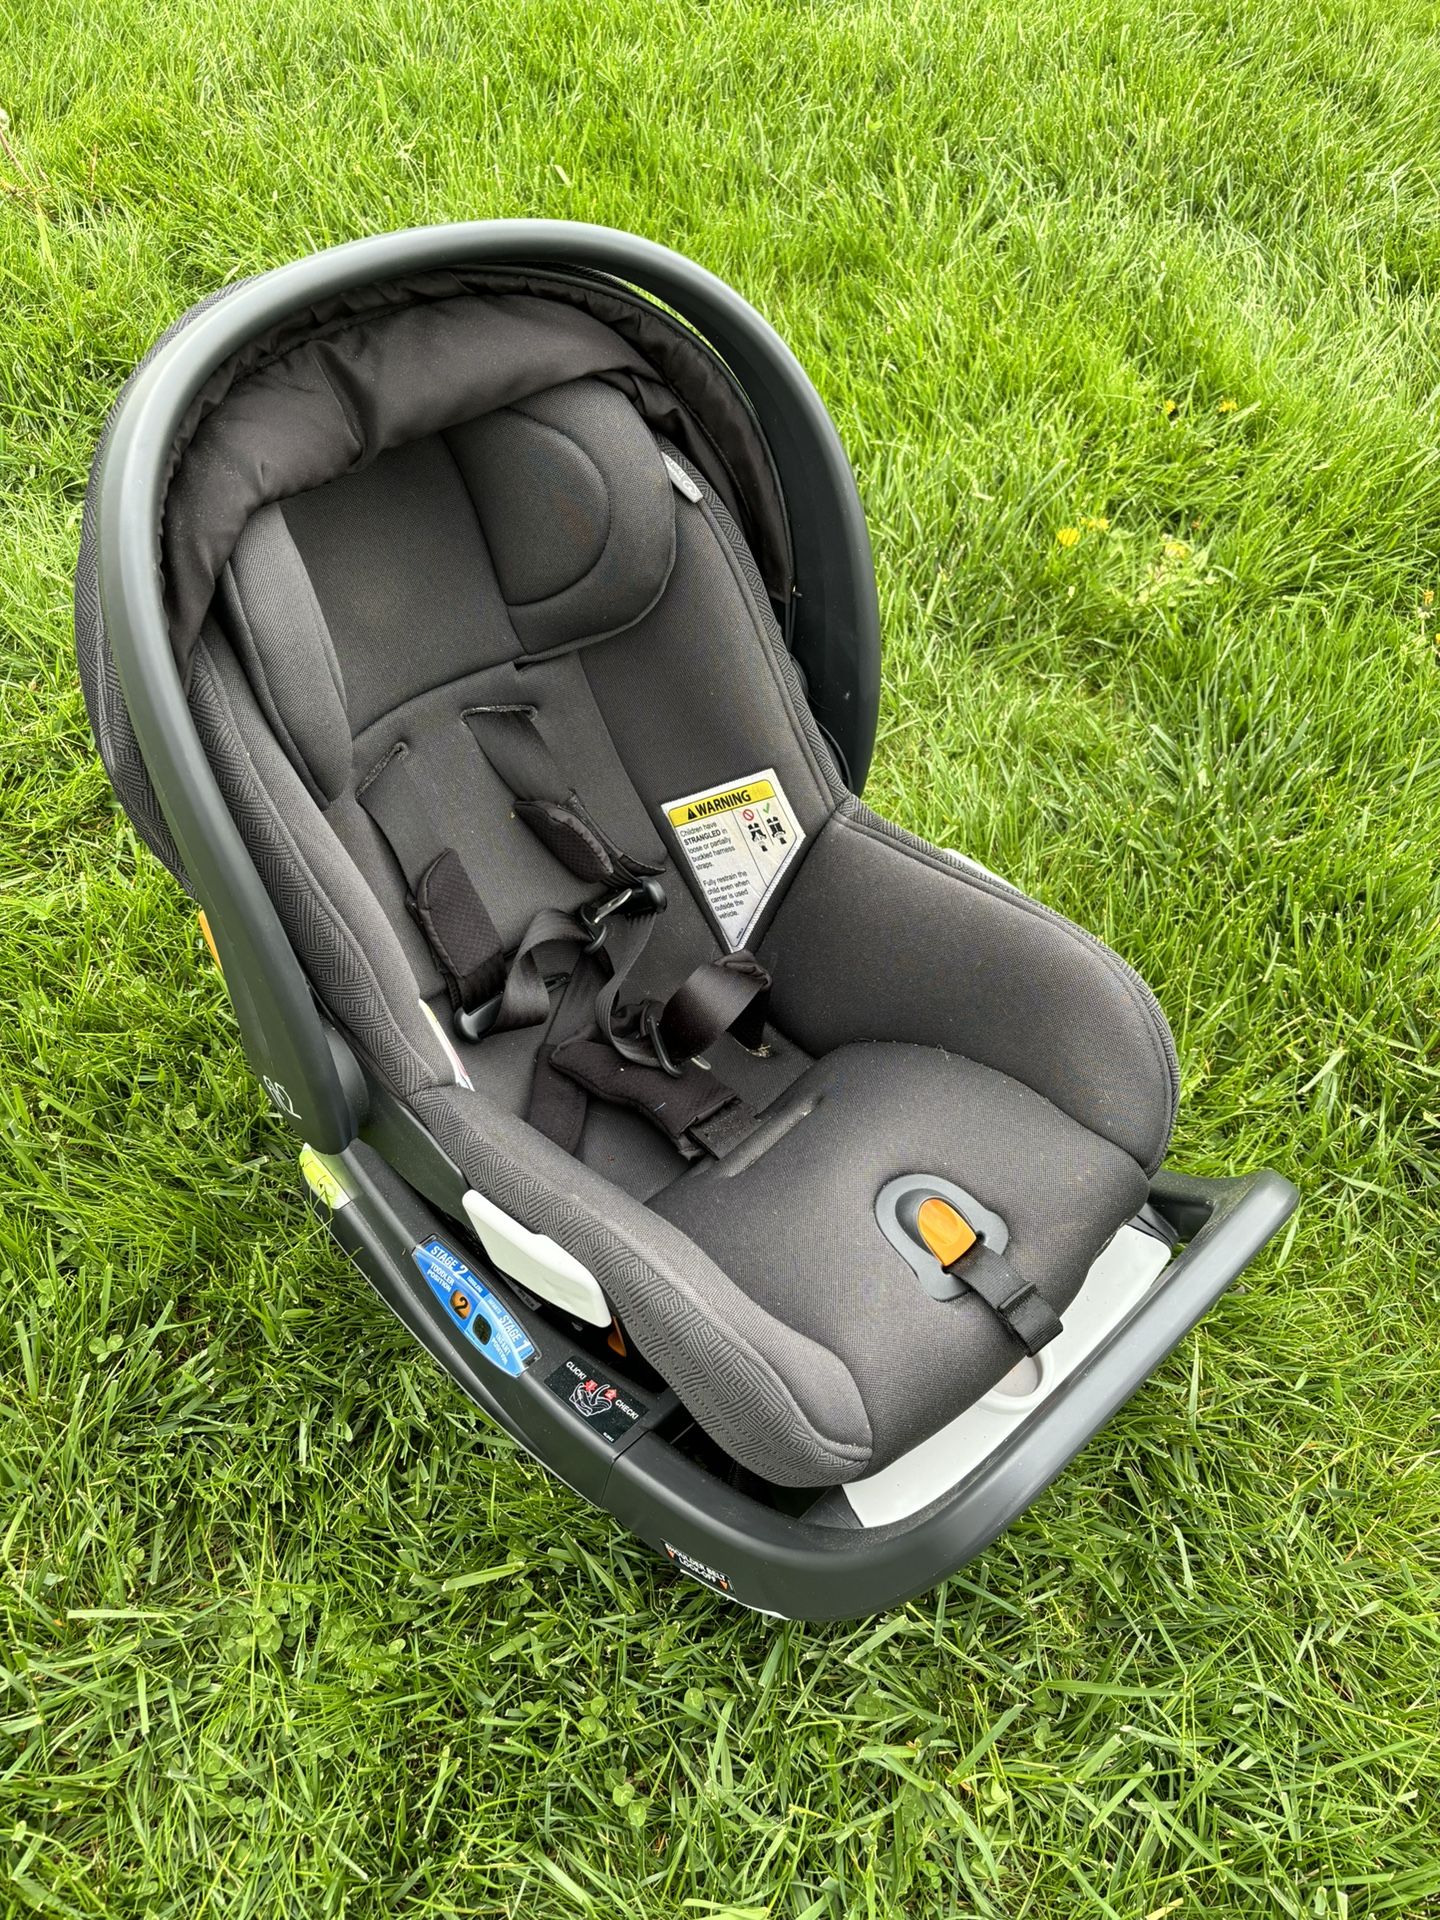 Chicco Fit2 Car Seat And Shuttle Stroller